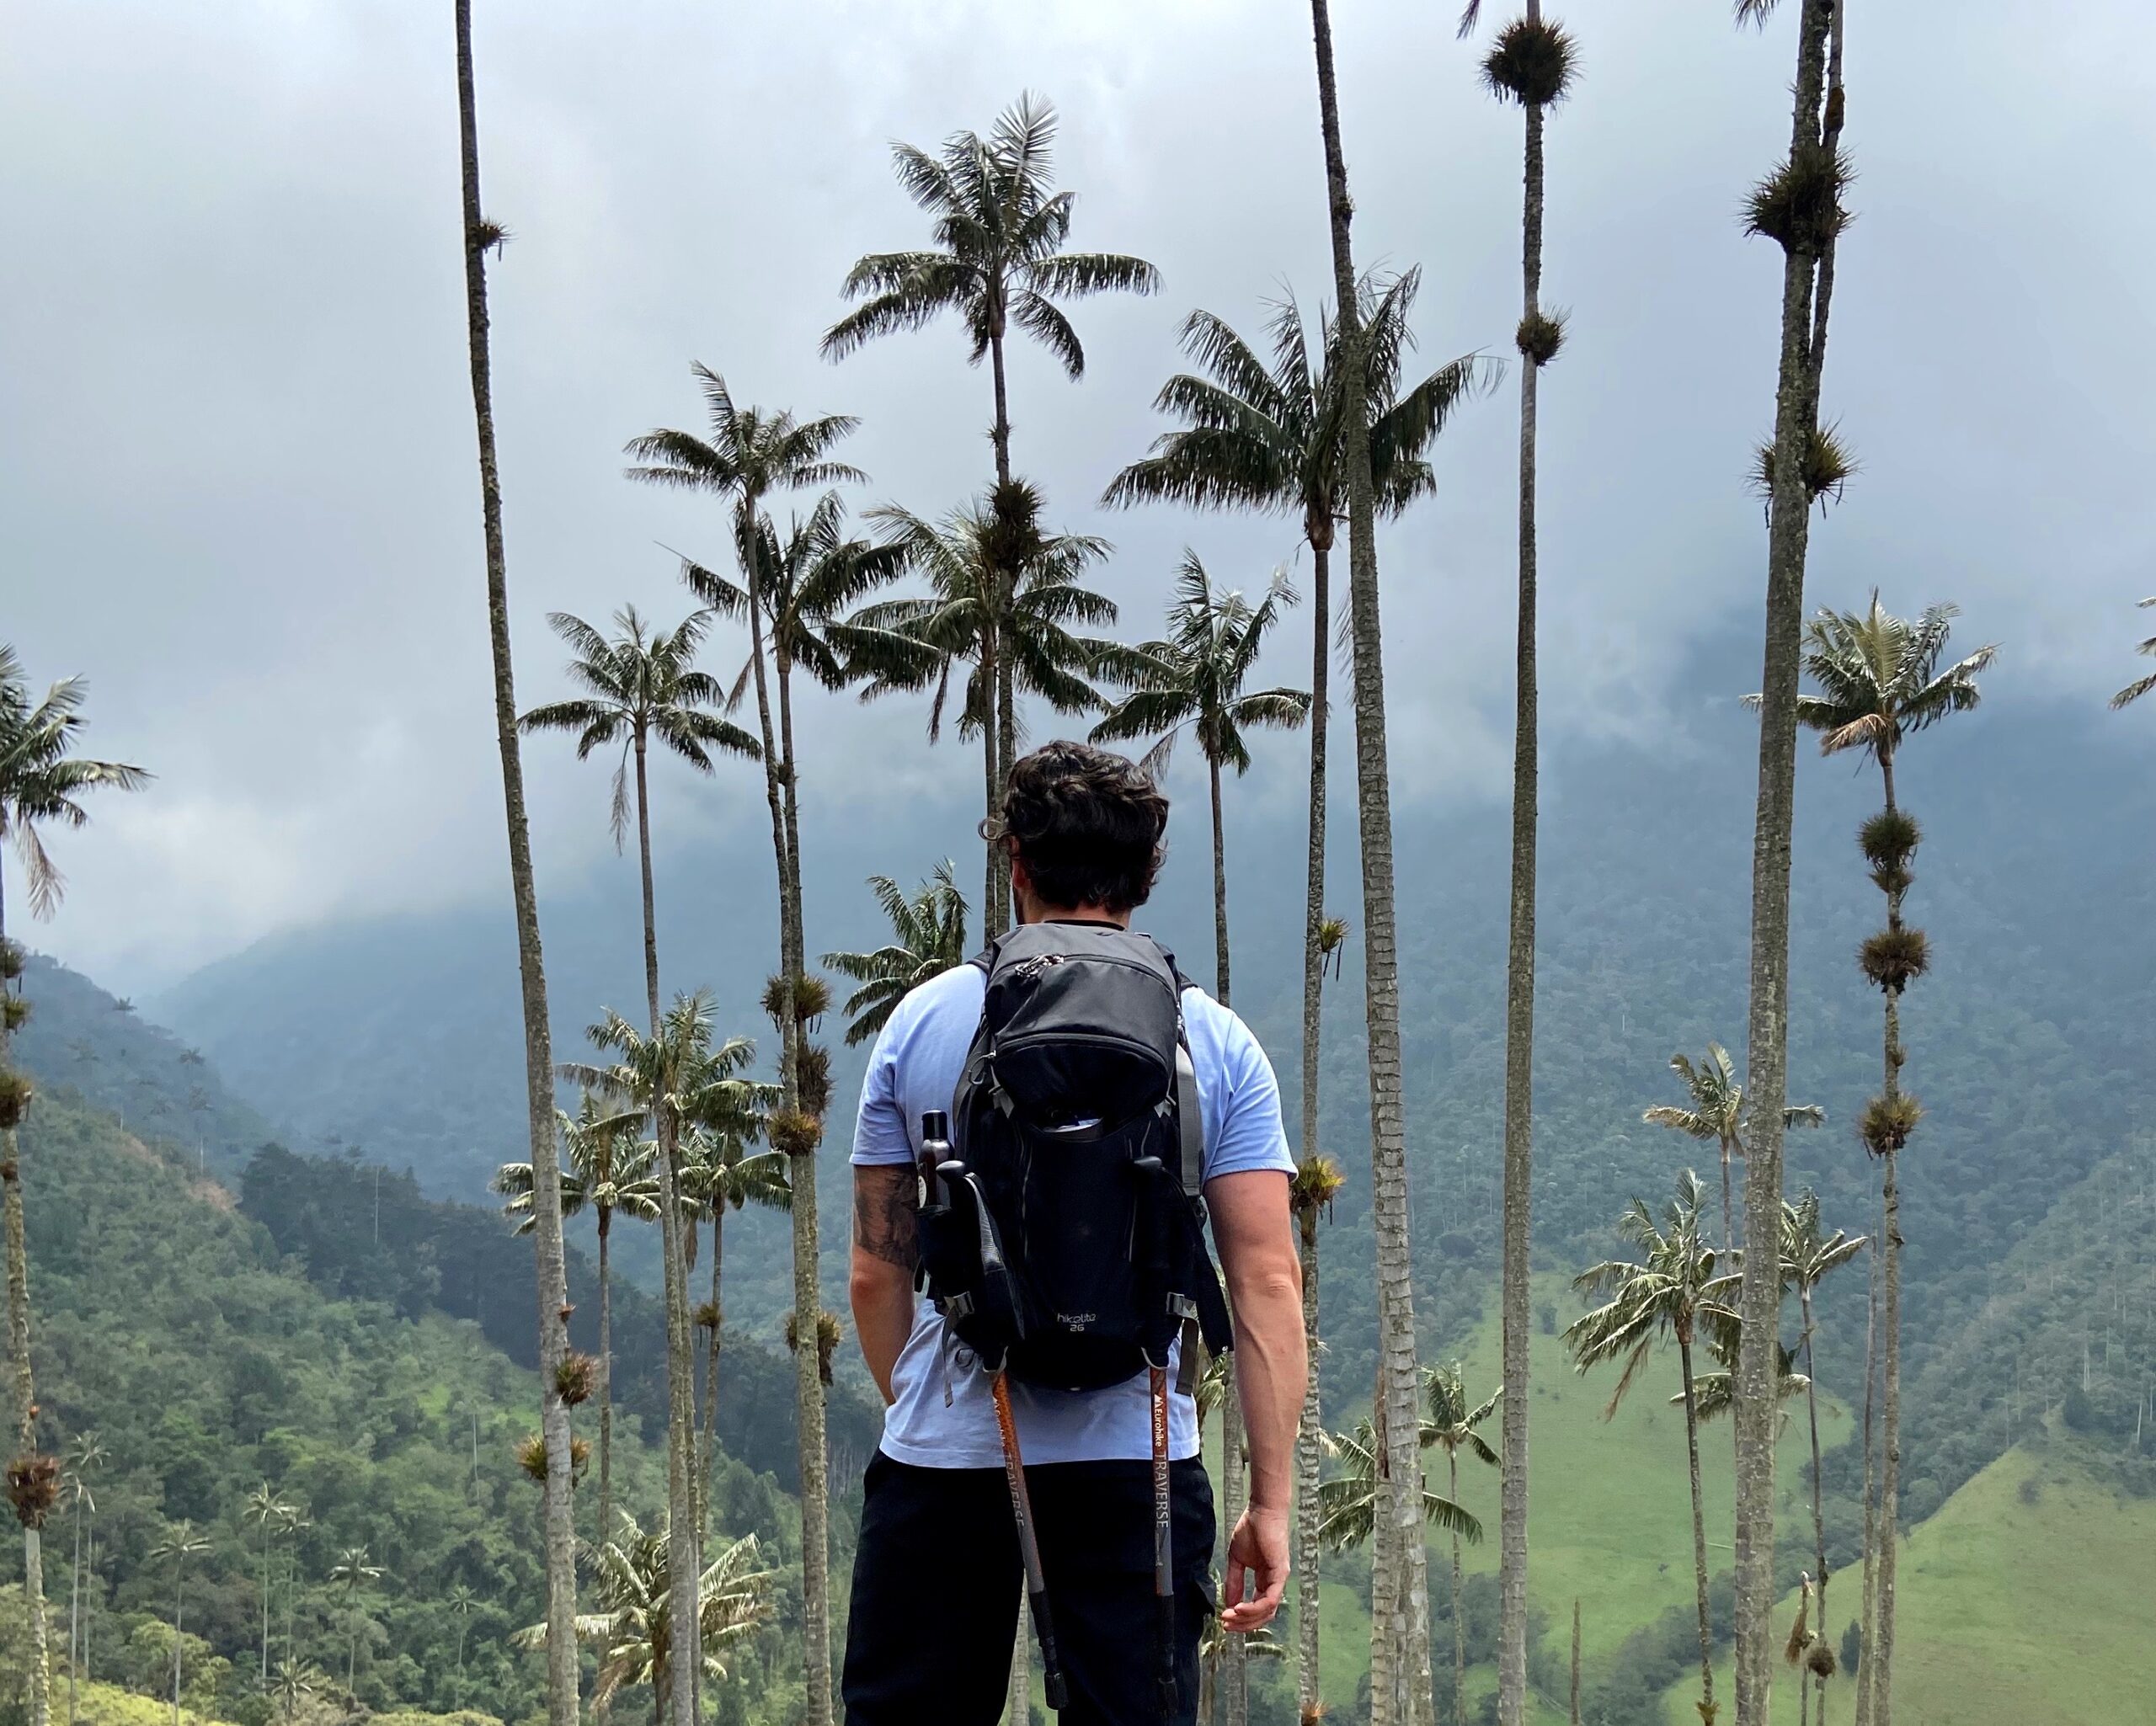 Alex looking out over Valle de Cocora Palms